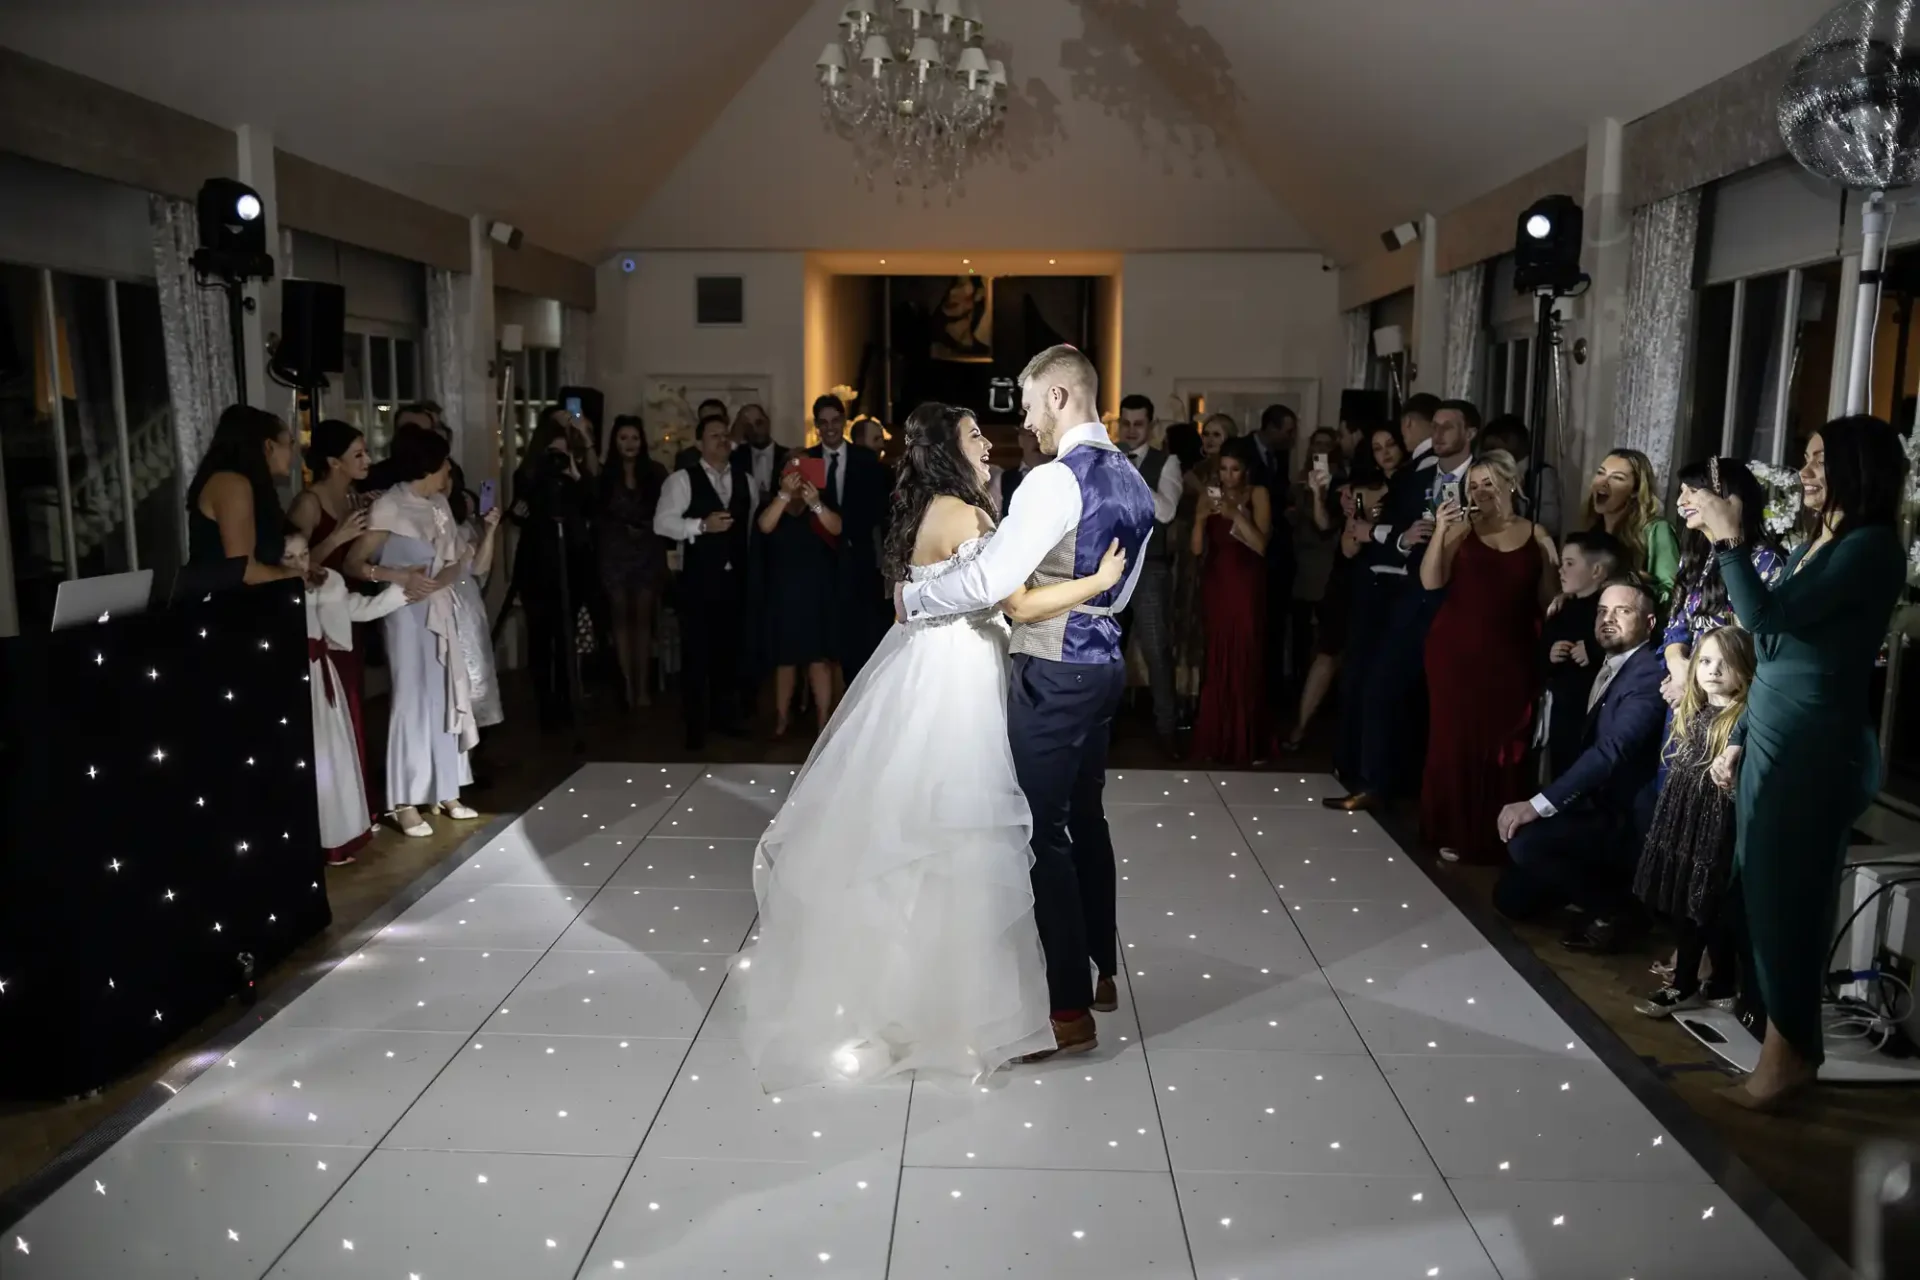 A bride and groom share a dance on a lit dance floor surrounded by guests at a wedding reception.